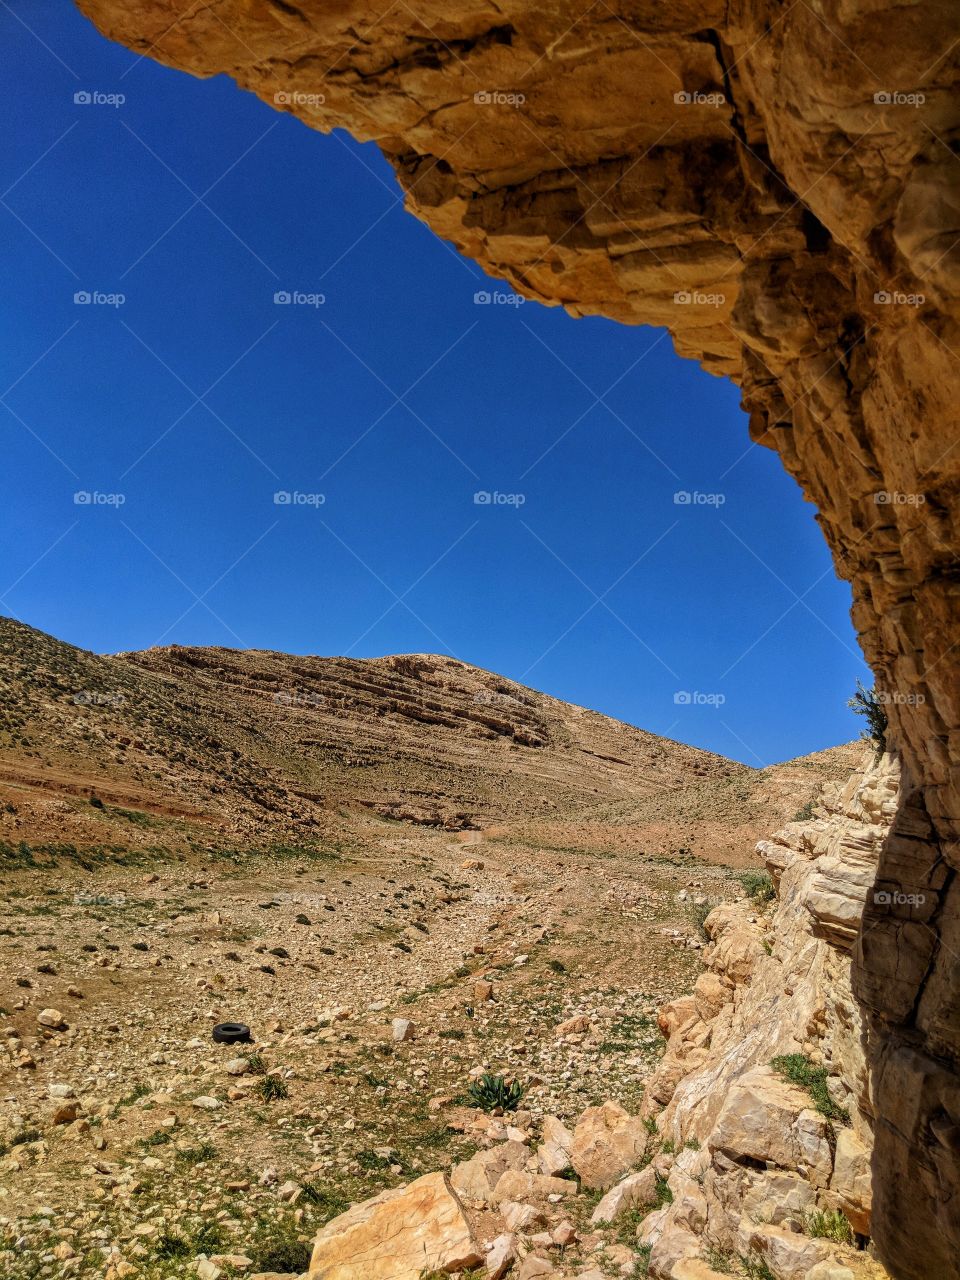 Under the shade of a natural cavity, hiking near the Judaean desert